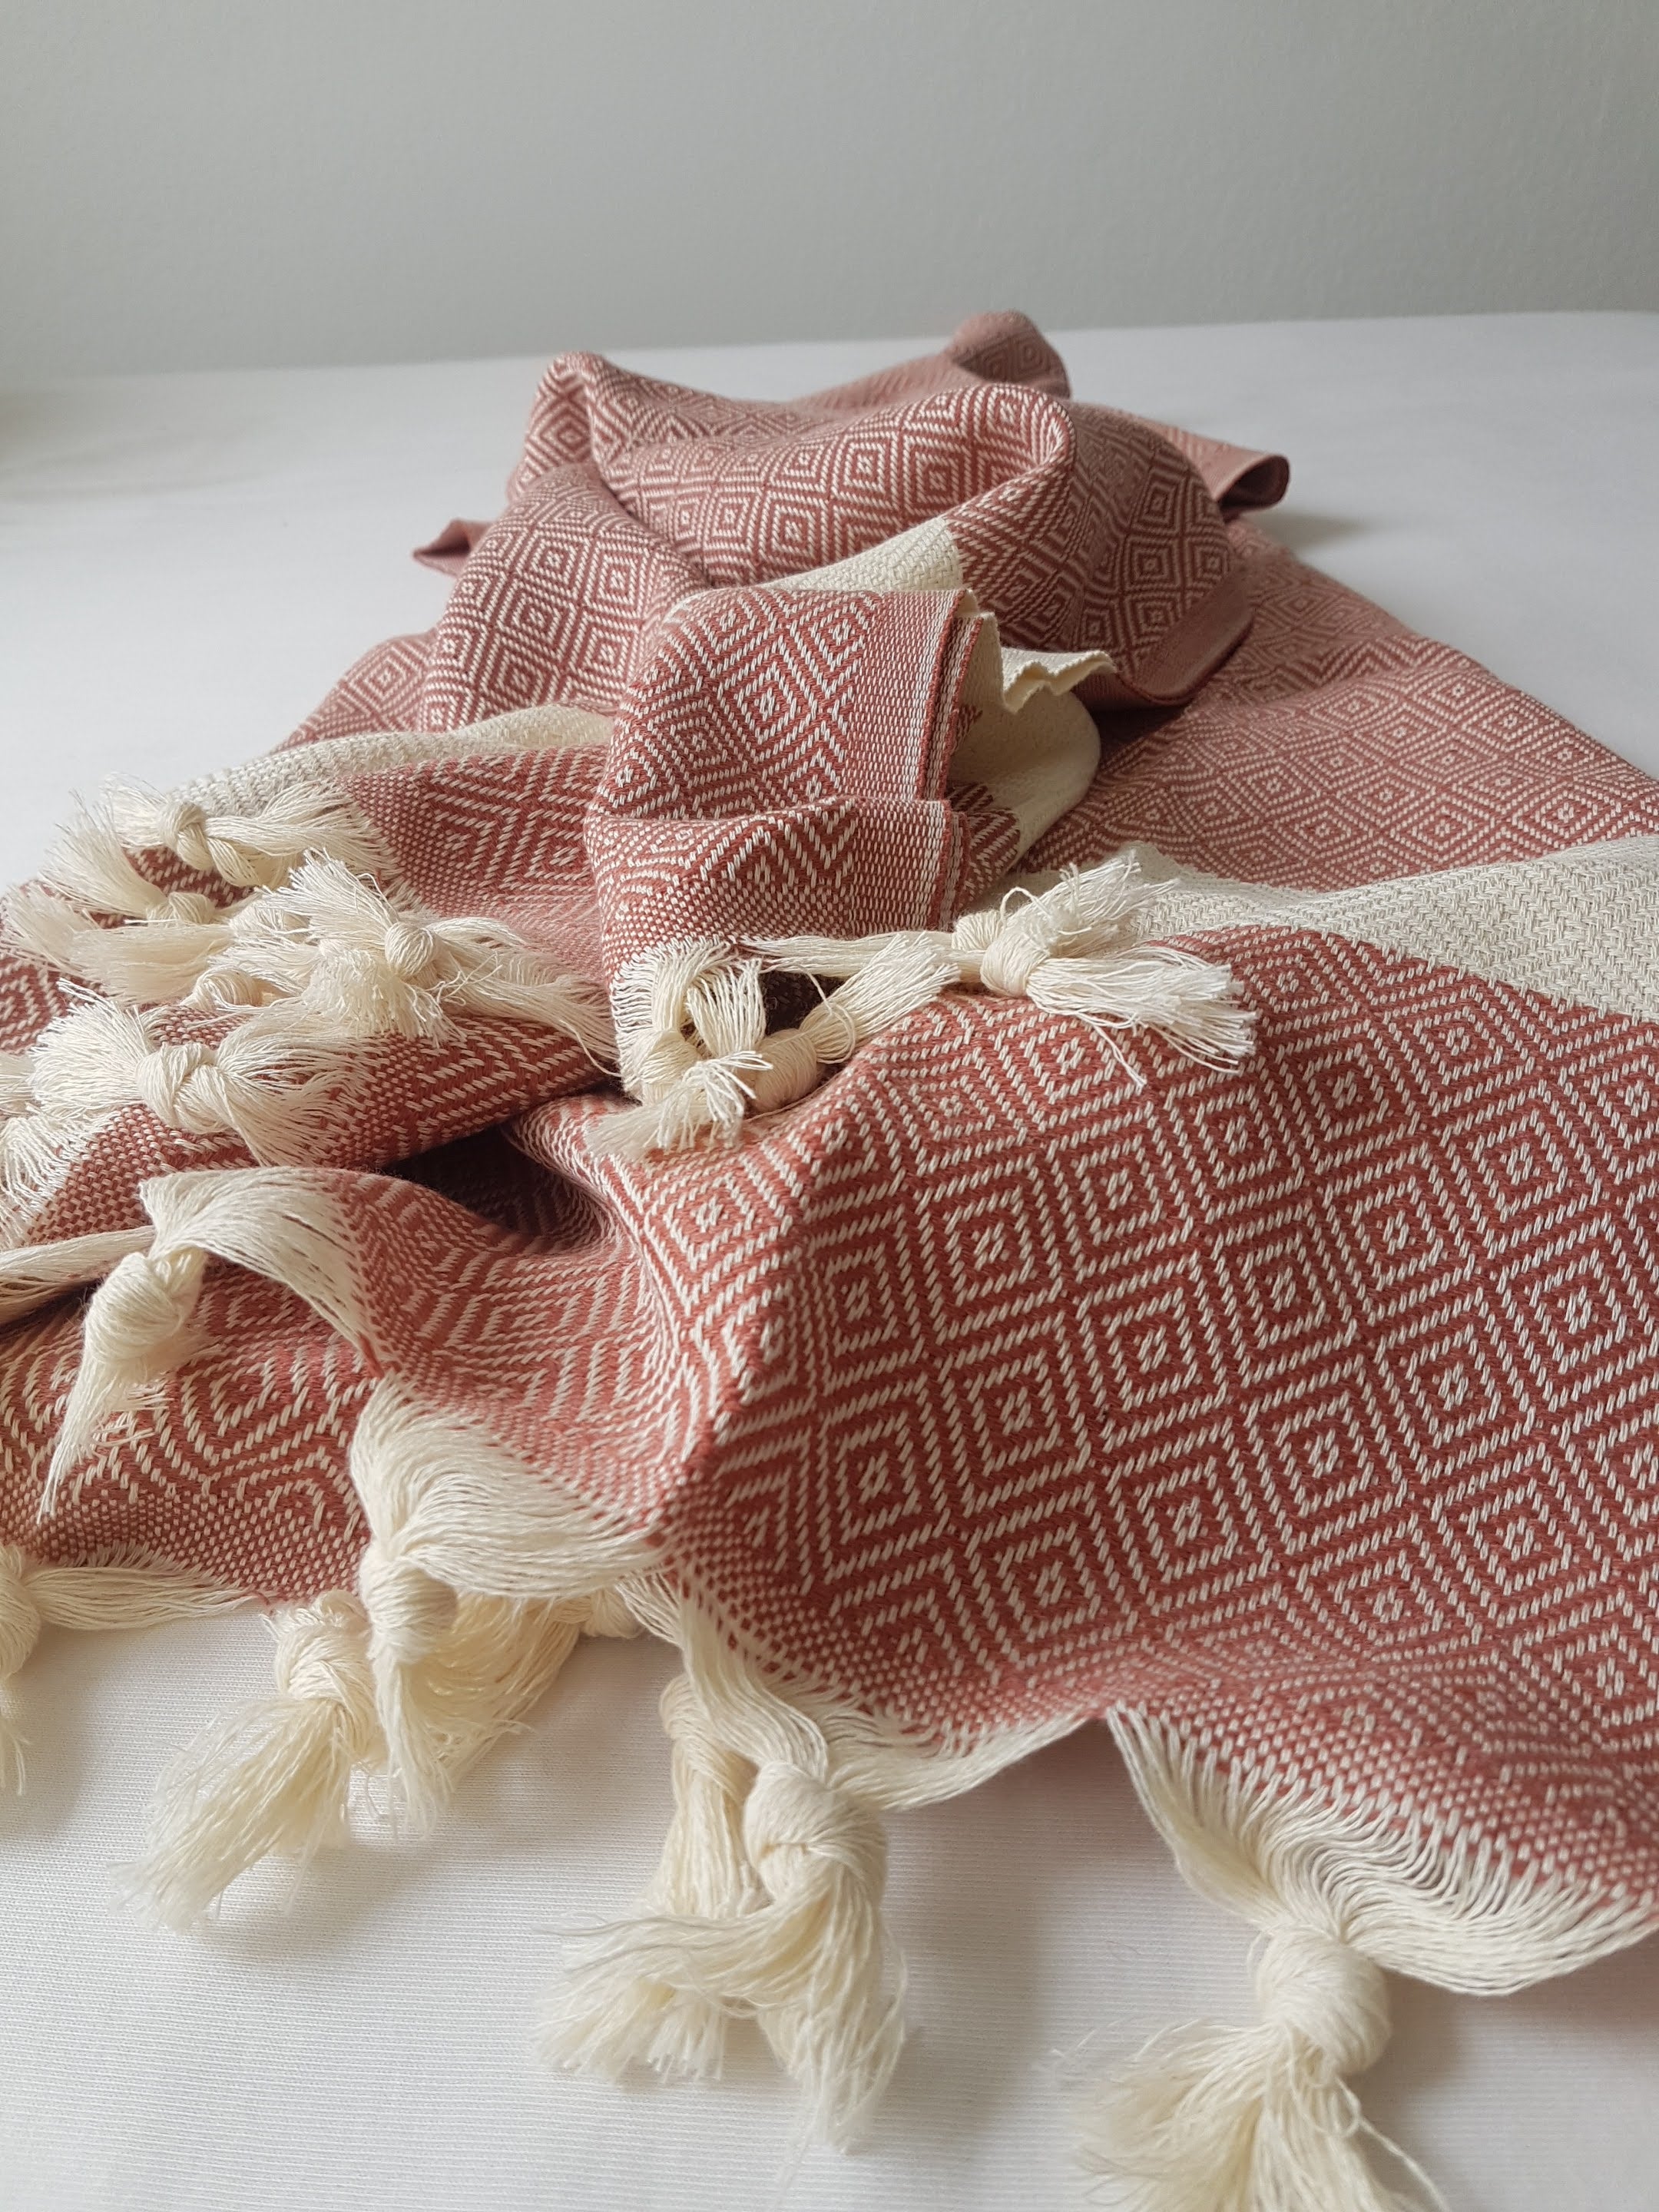 El Patito towels and bathrobes Contemporary Series 100% Cotton Turkish Towels - 100x180 cm (39"x71") Rose gold